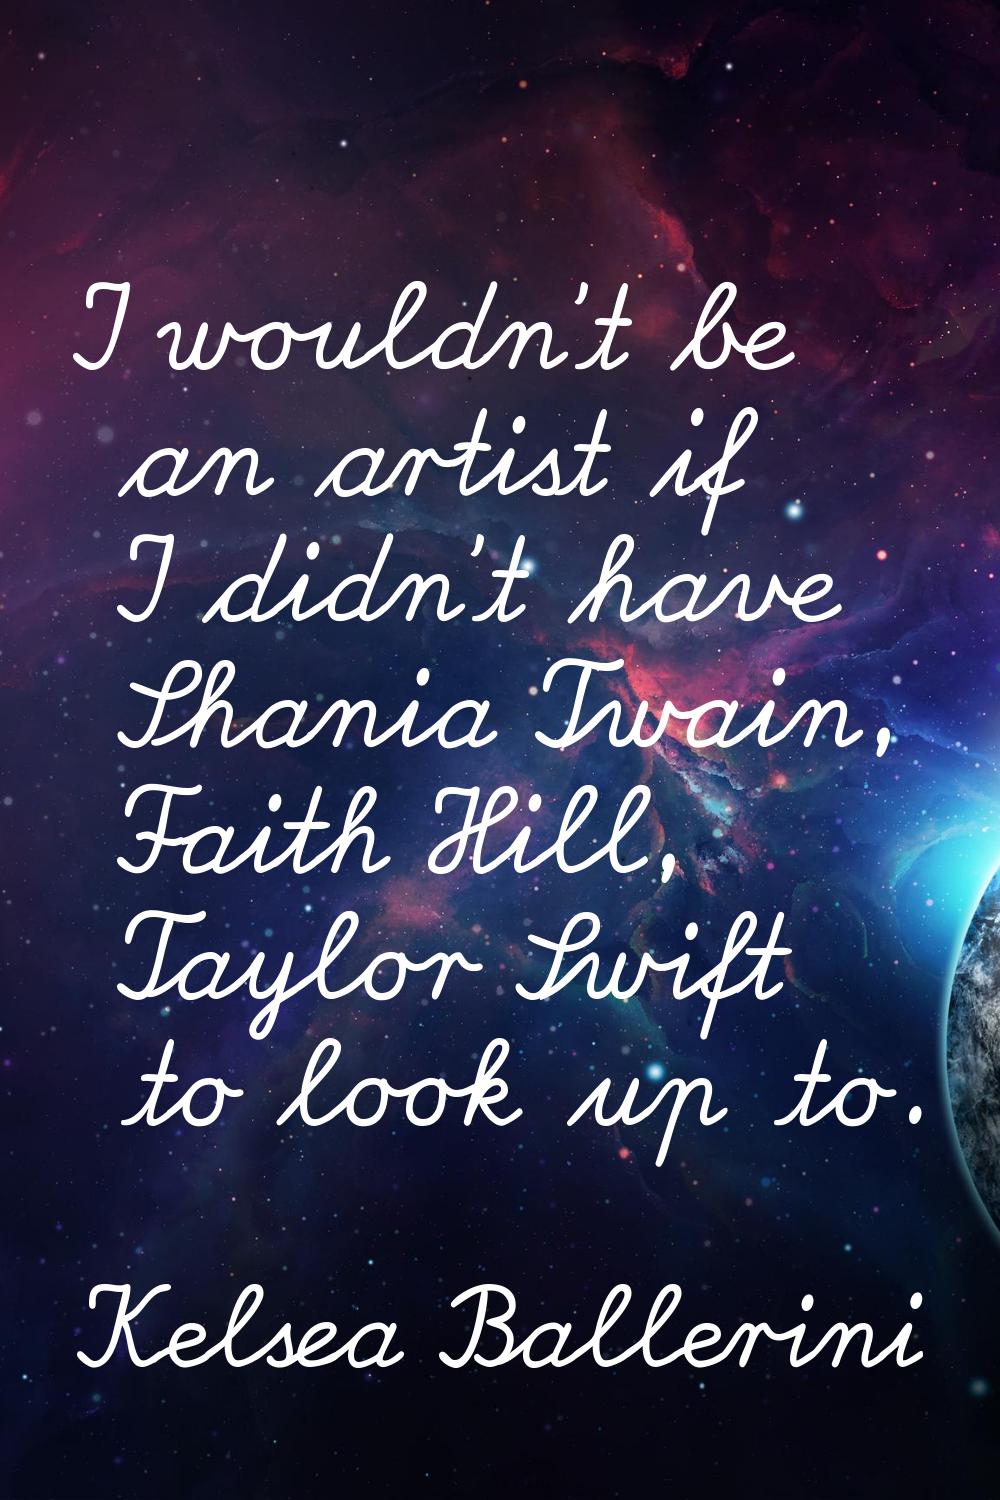 I wouldn't be an artist if I didn't have Shania Twain, Faith Hill, Taylor Swift to look up to.